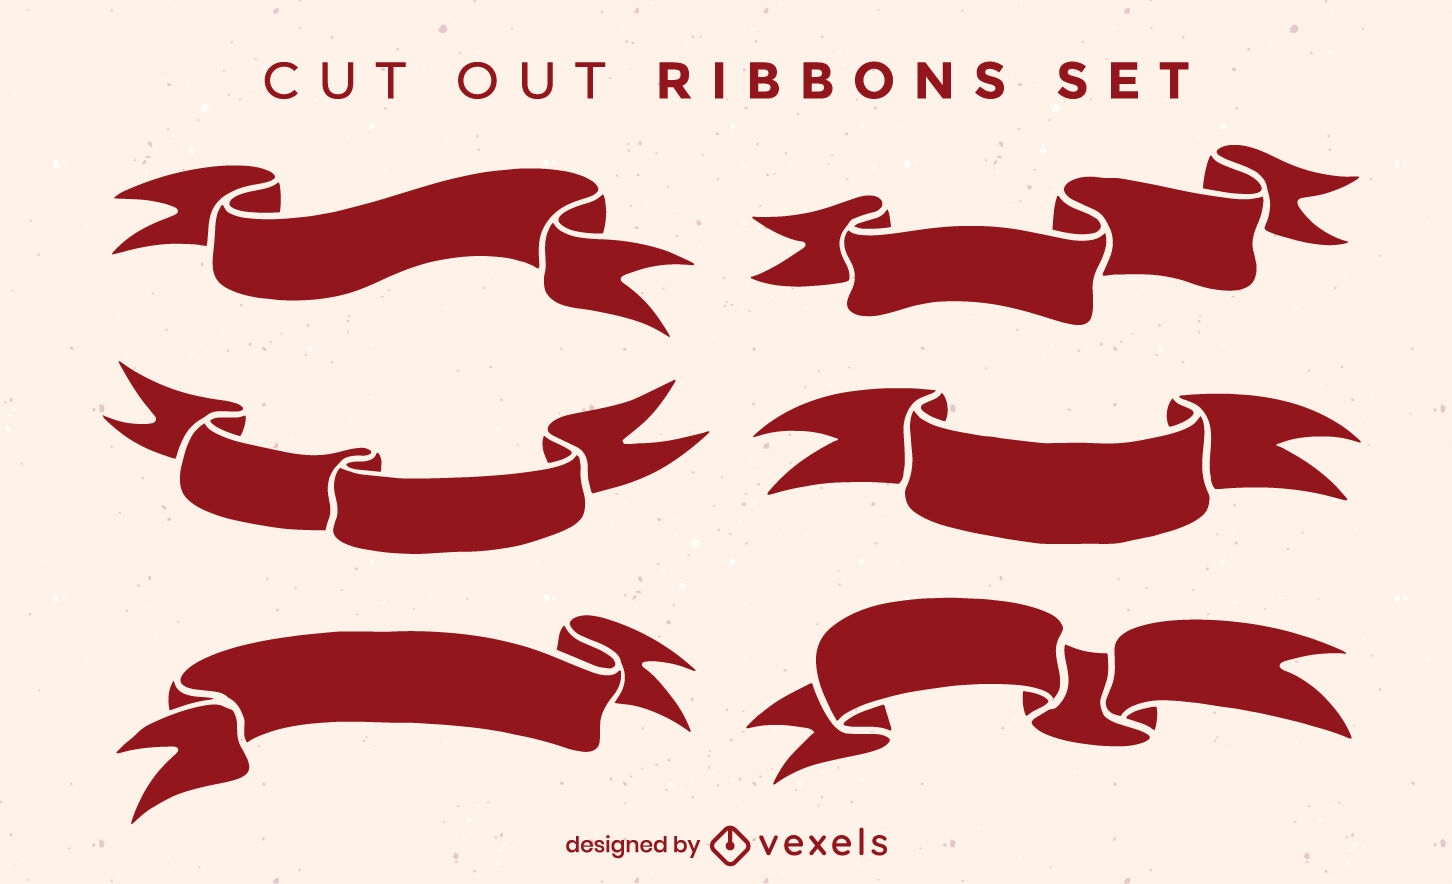 Cut our red ribbons set design